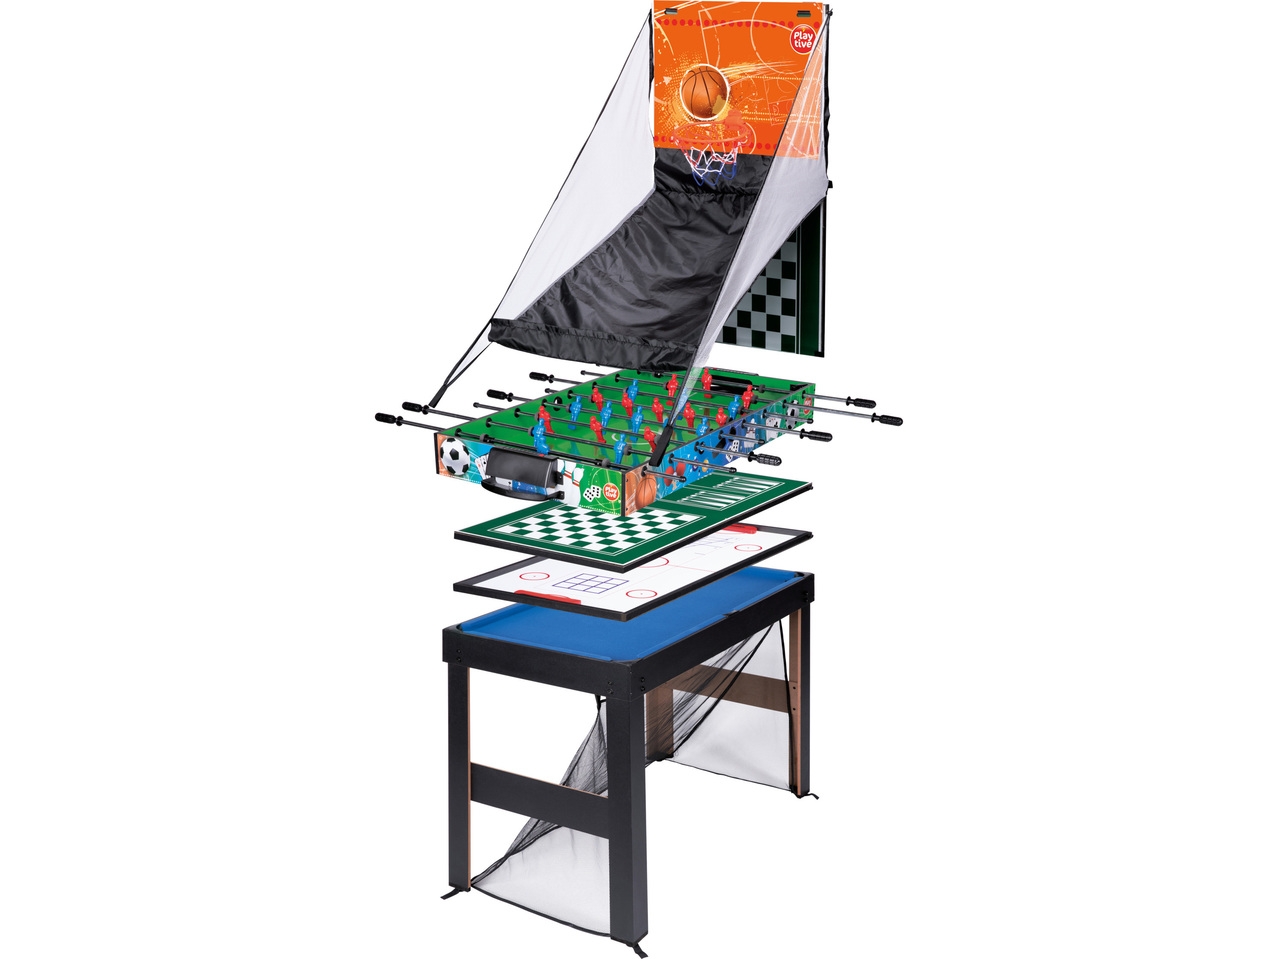 16-in-1 Multi Games Table